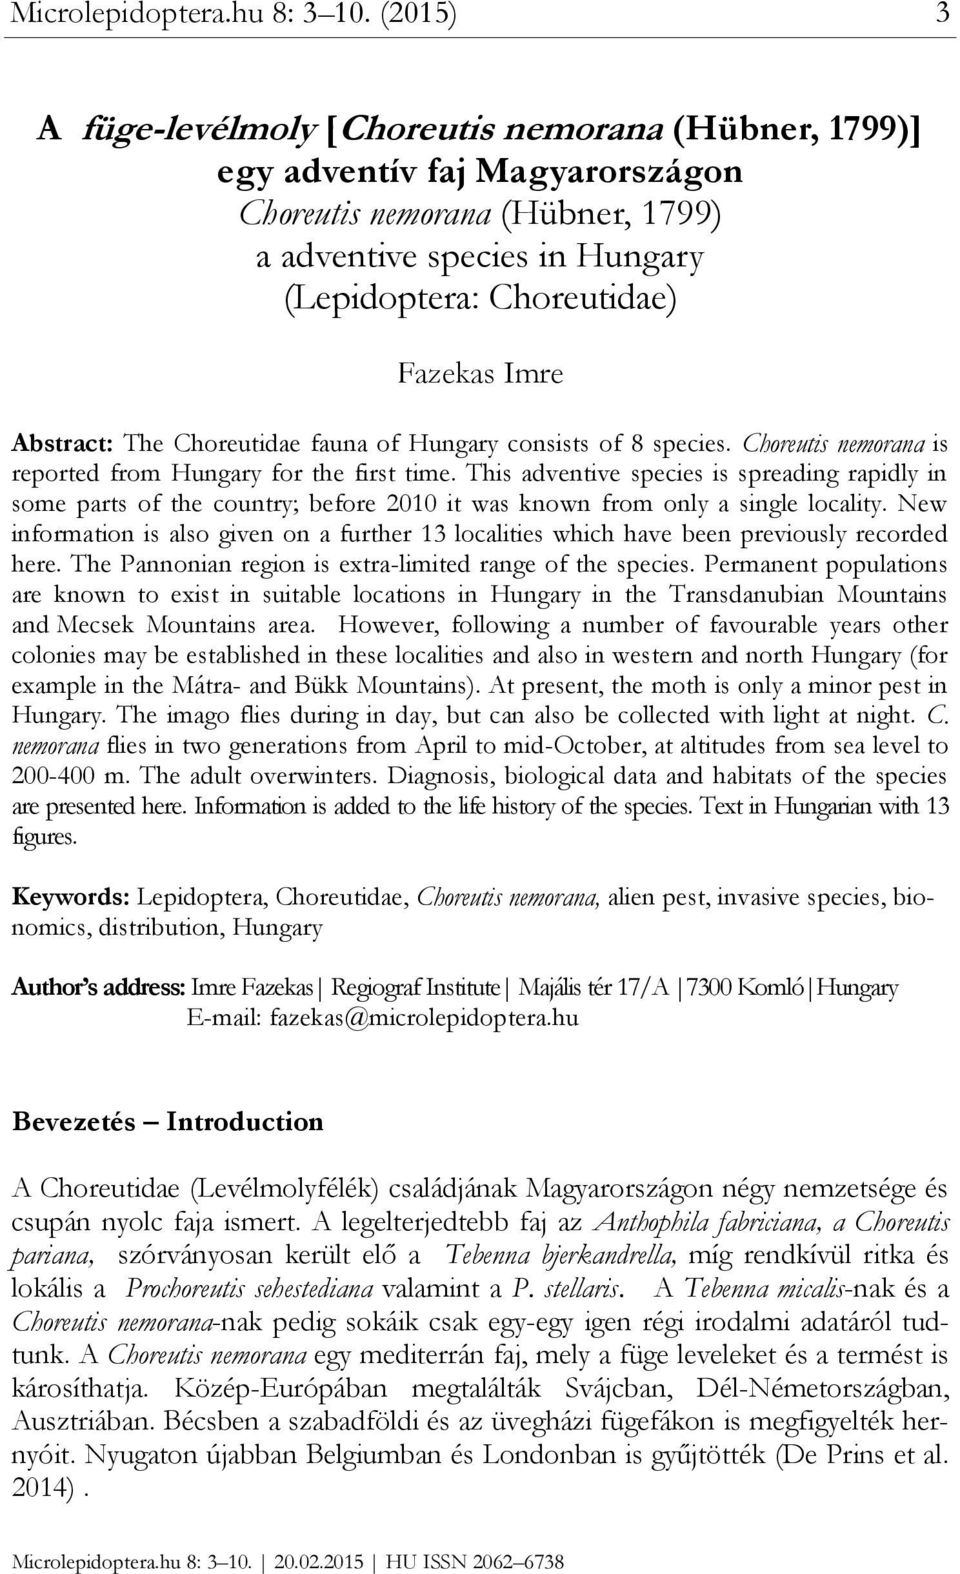 Abstract: The Choreutidae fauna of Hungary consists of 8 species. Choreutis nemorana is reported from Hungary for the first time.